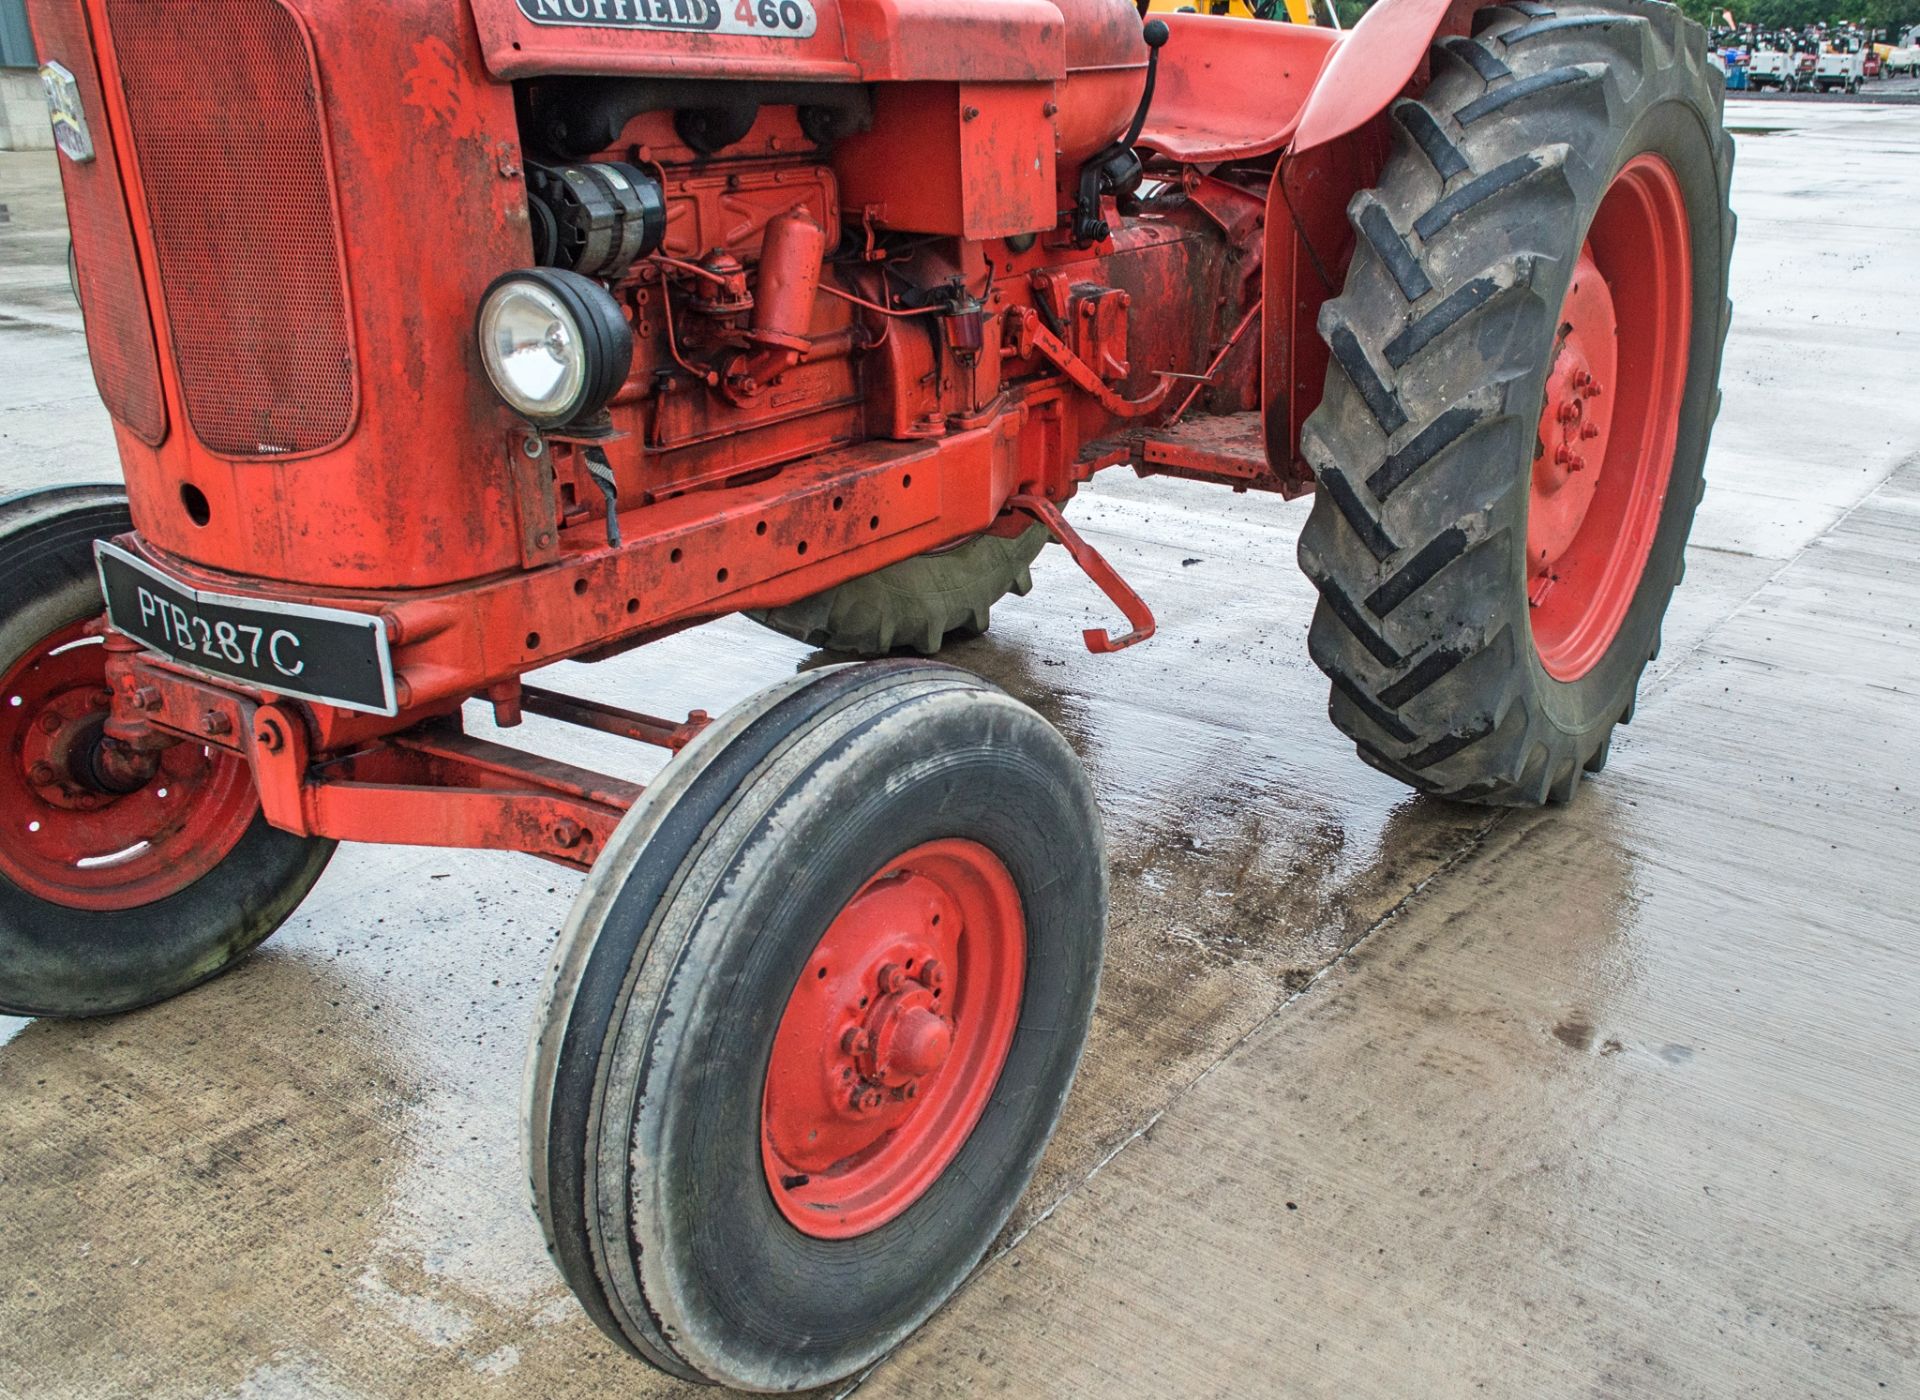 Nuffield 460 2 wheel drive diesel driven tractor  Reg Number: PTB 287C  S/N: 60B 1500 57042 - Image 10 of 16